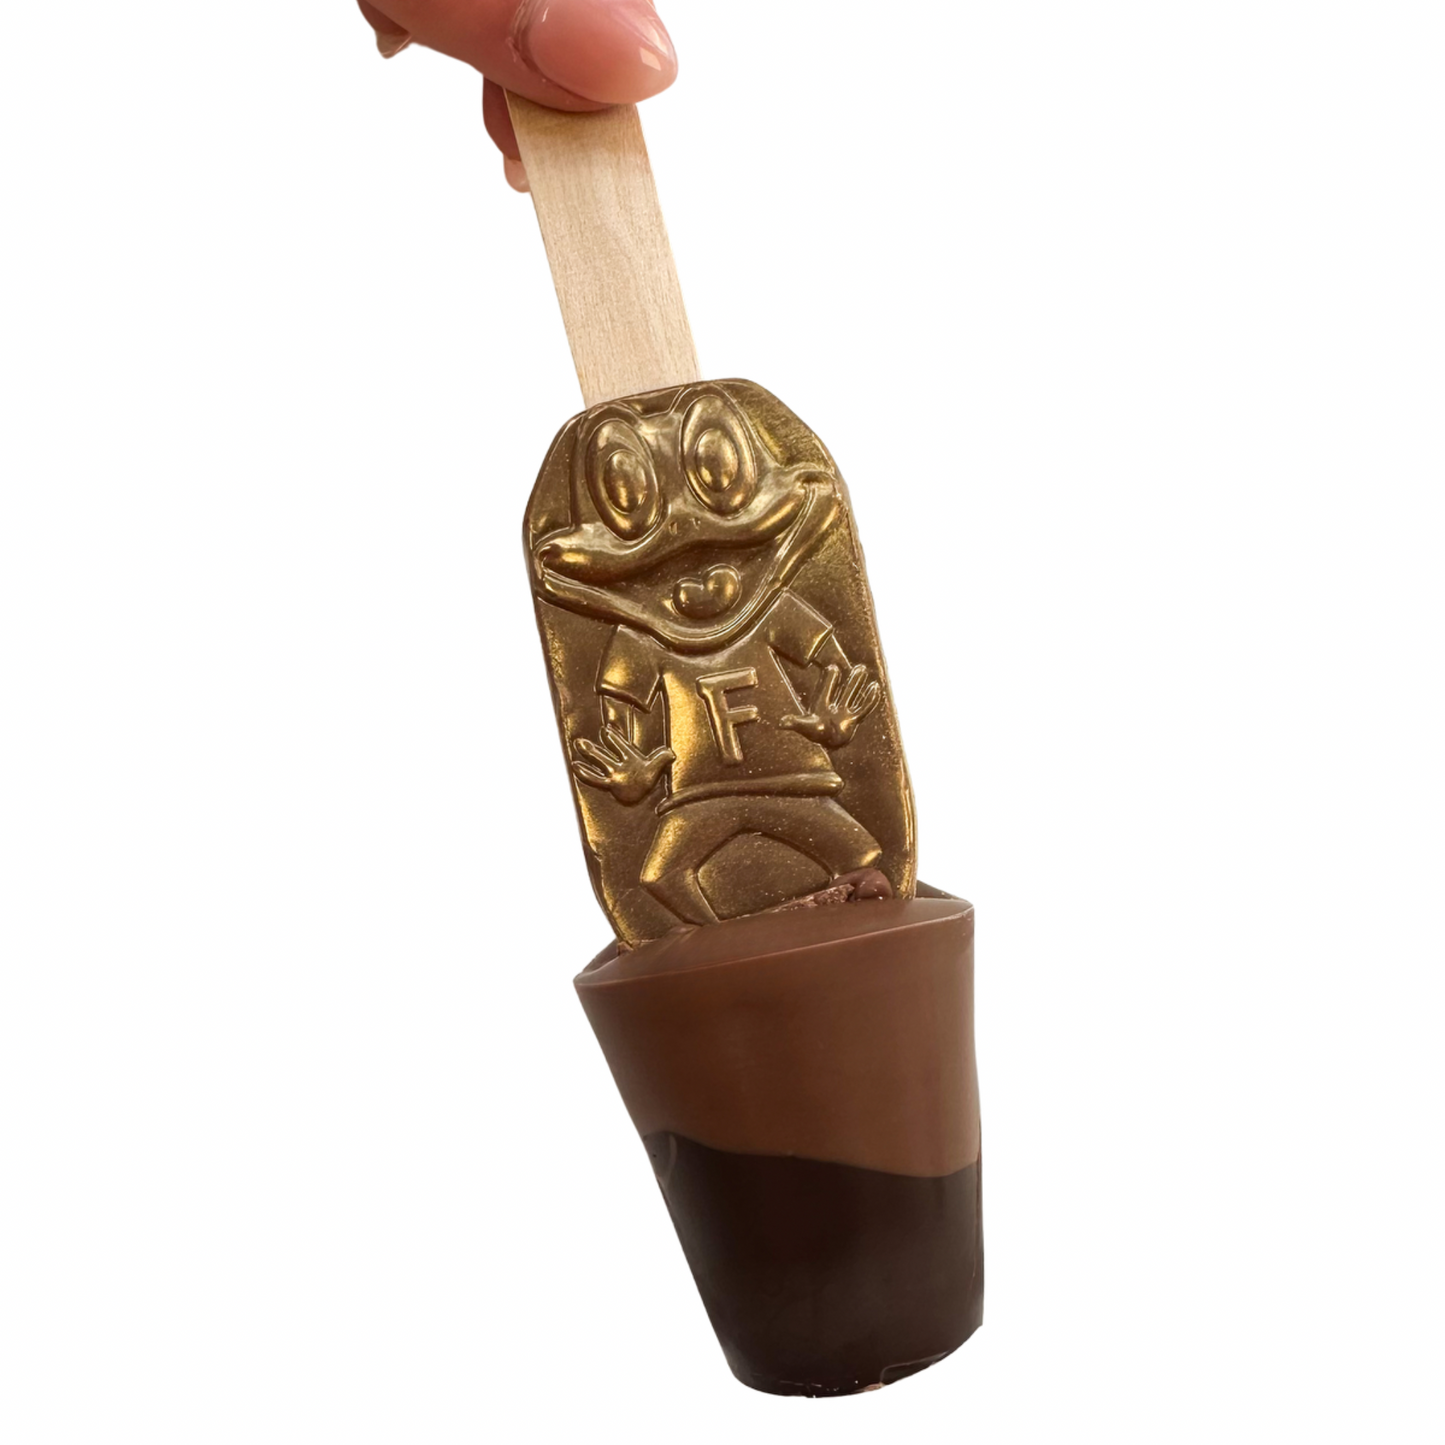 Hot Chocolate Stirrer - Choose Your Flavour